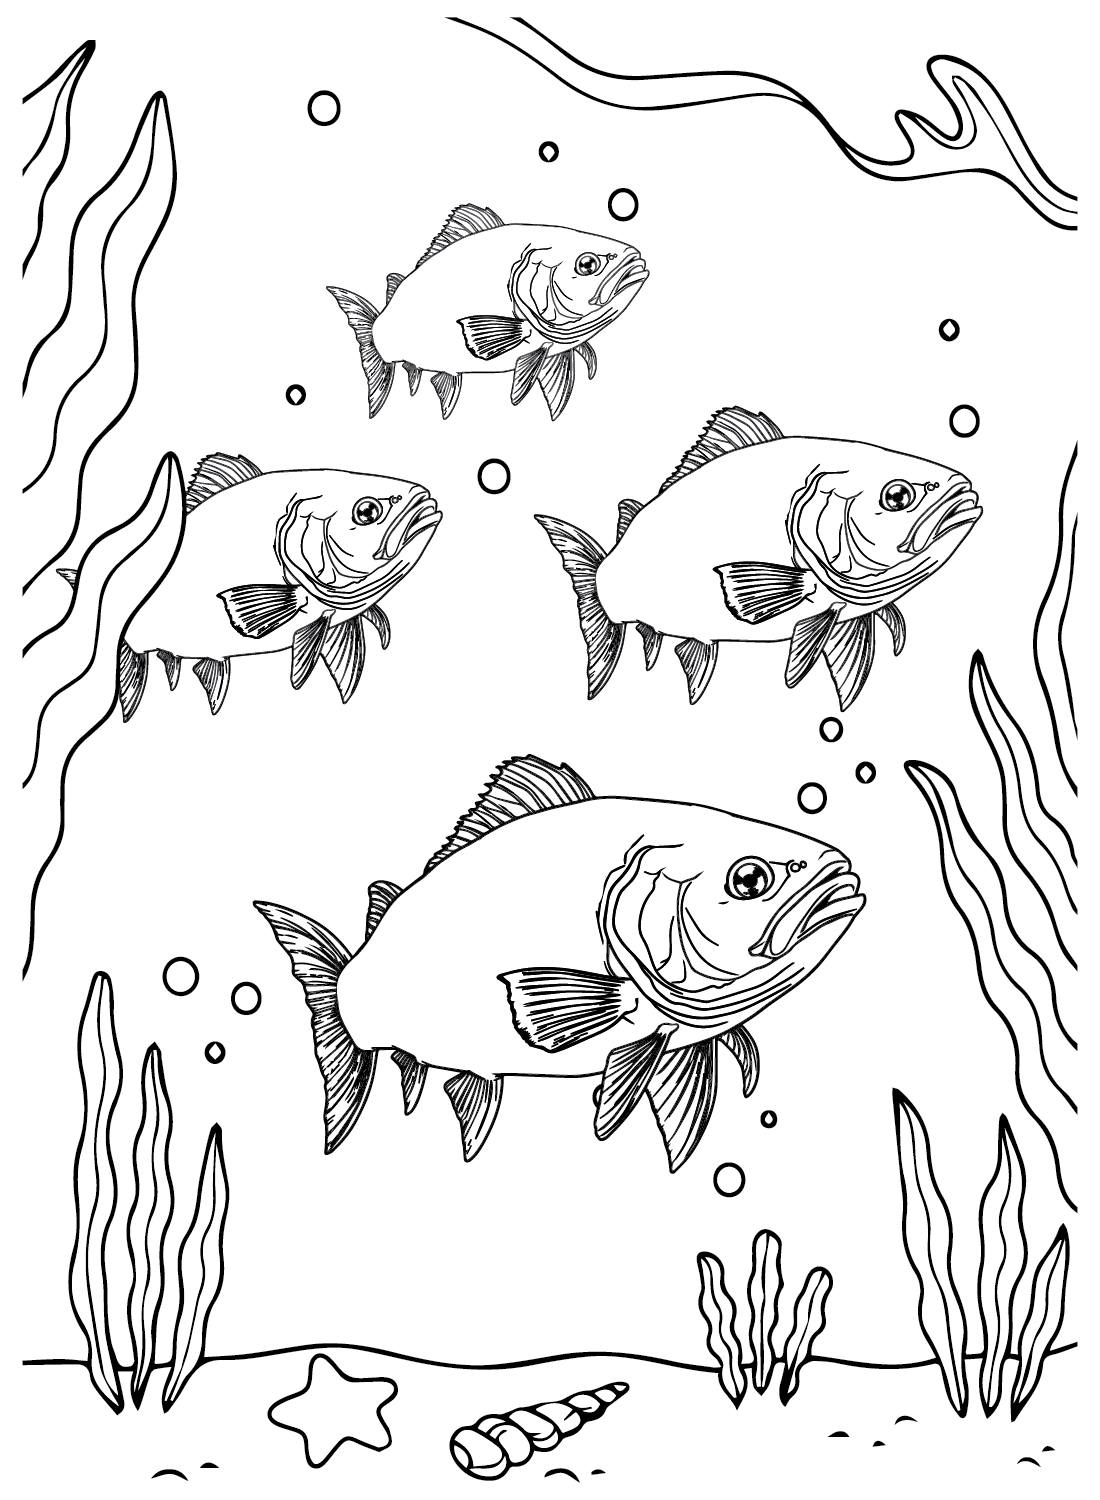 Free Bluefish Coloring Pages